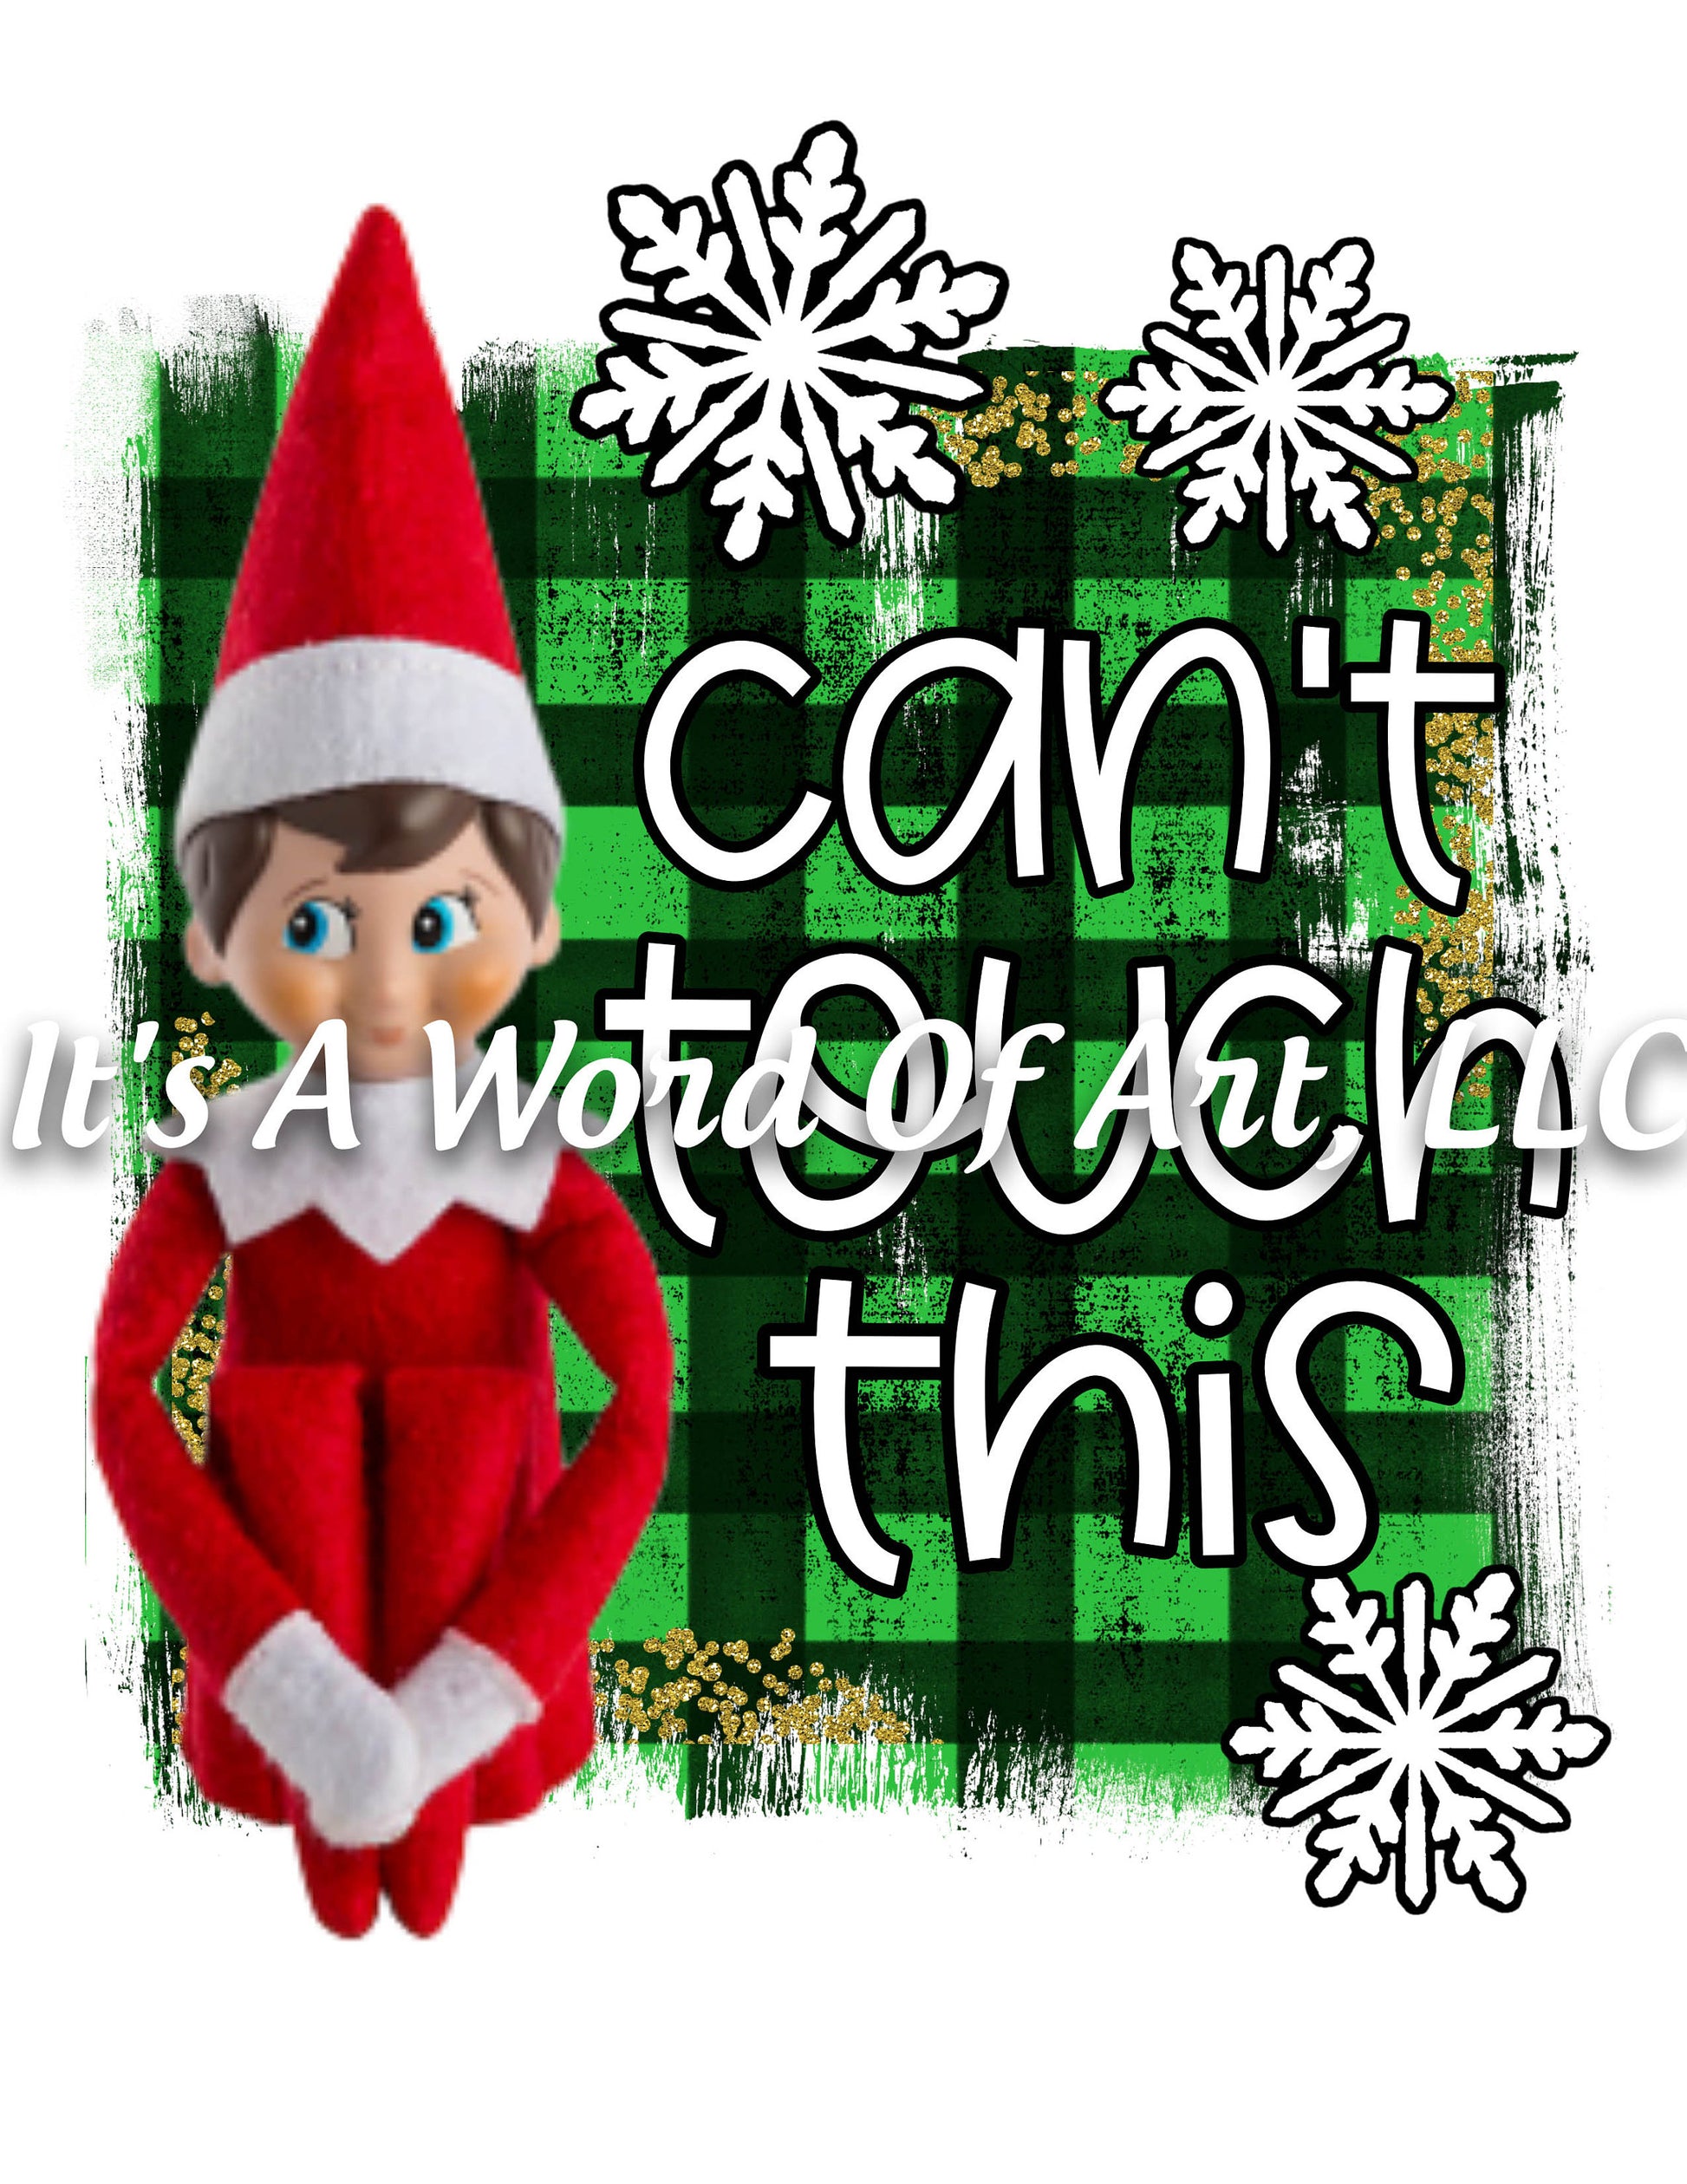 Christmas 241 - Can't Touch This Elf on the Shelf- Sublimation Transfer Set/Ready To Press Sublimation Transfer/Sublimation Transfer